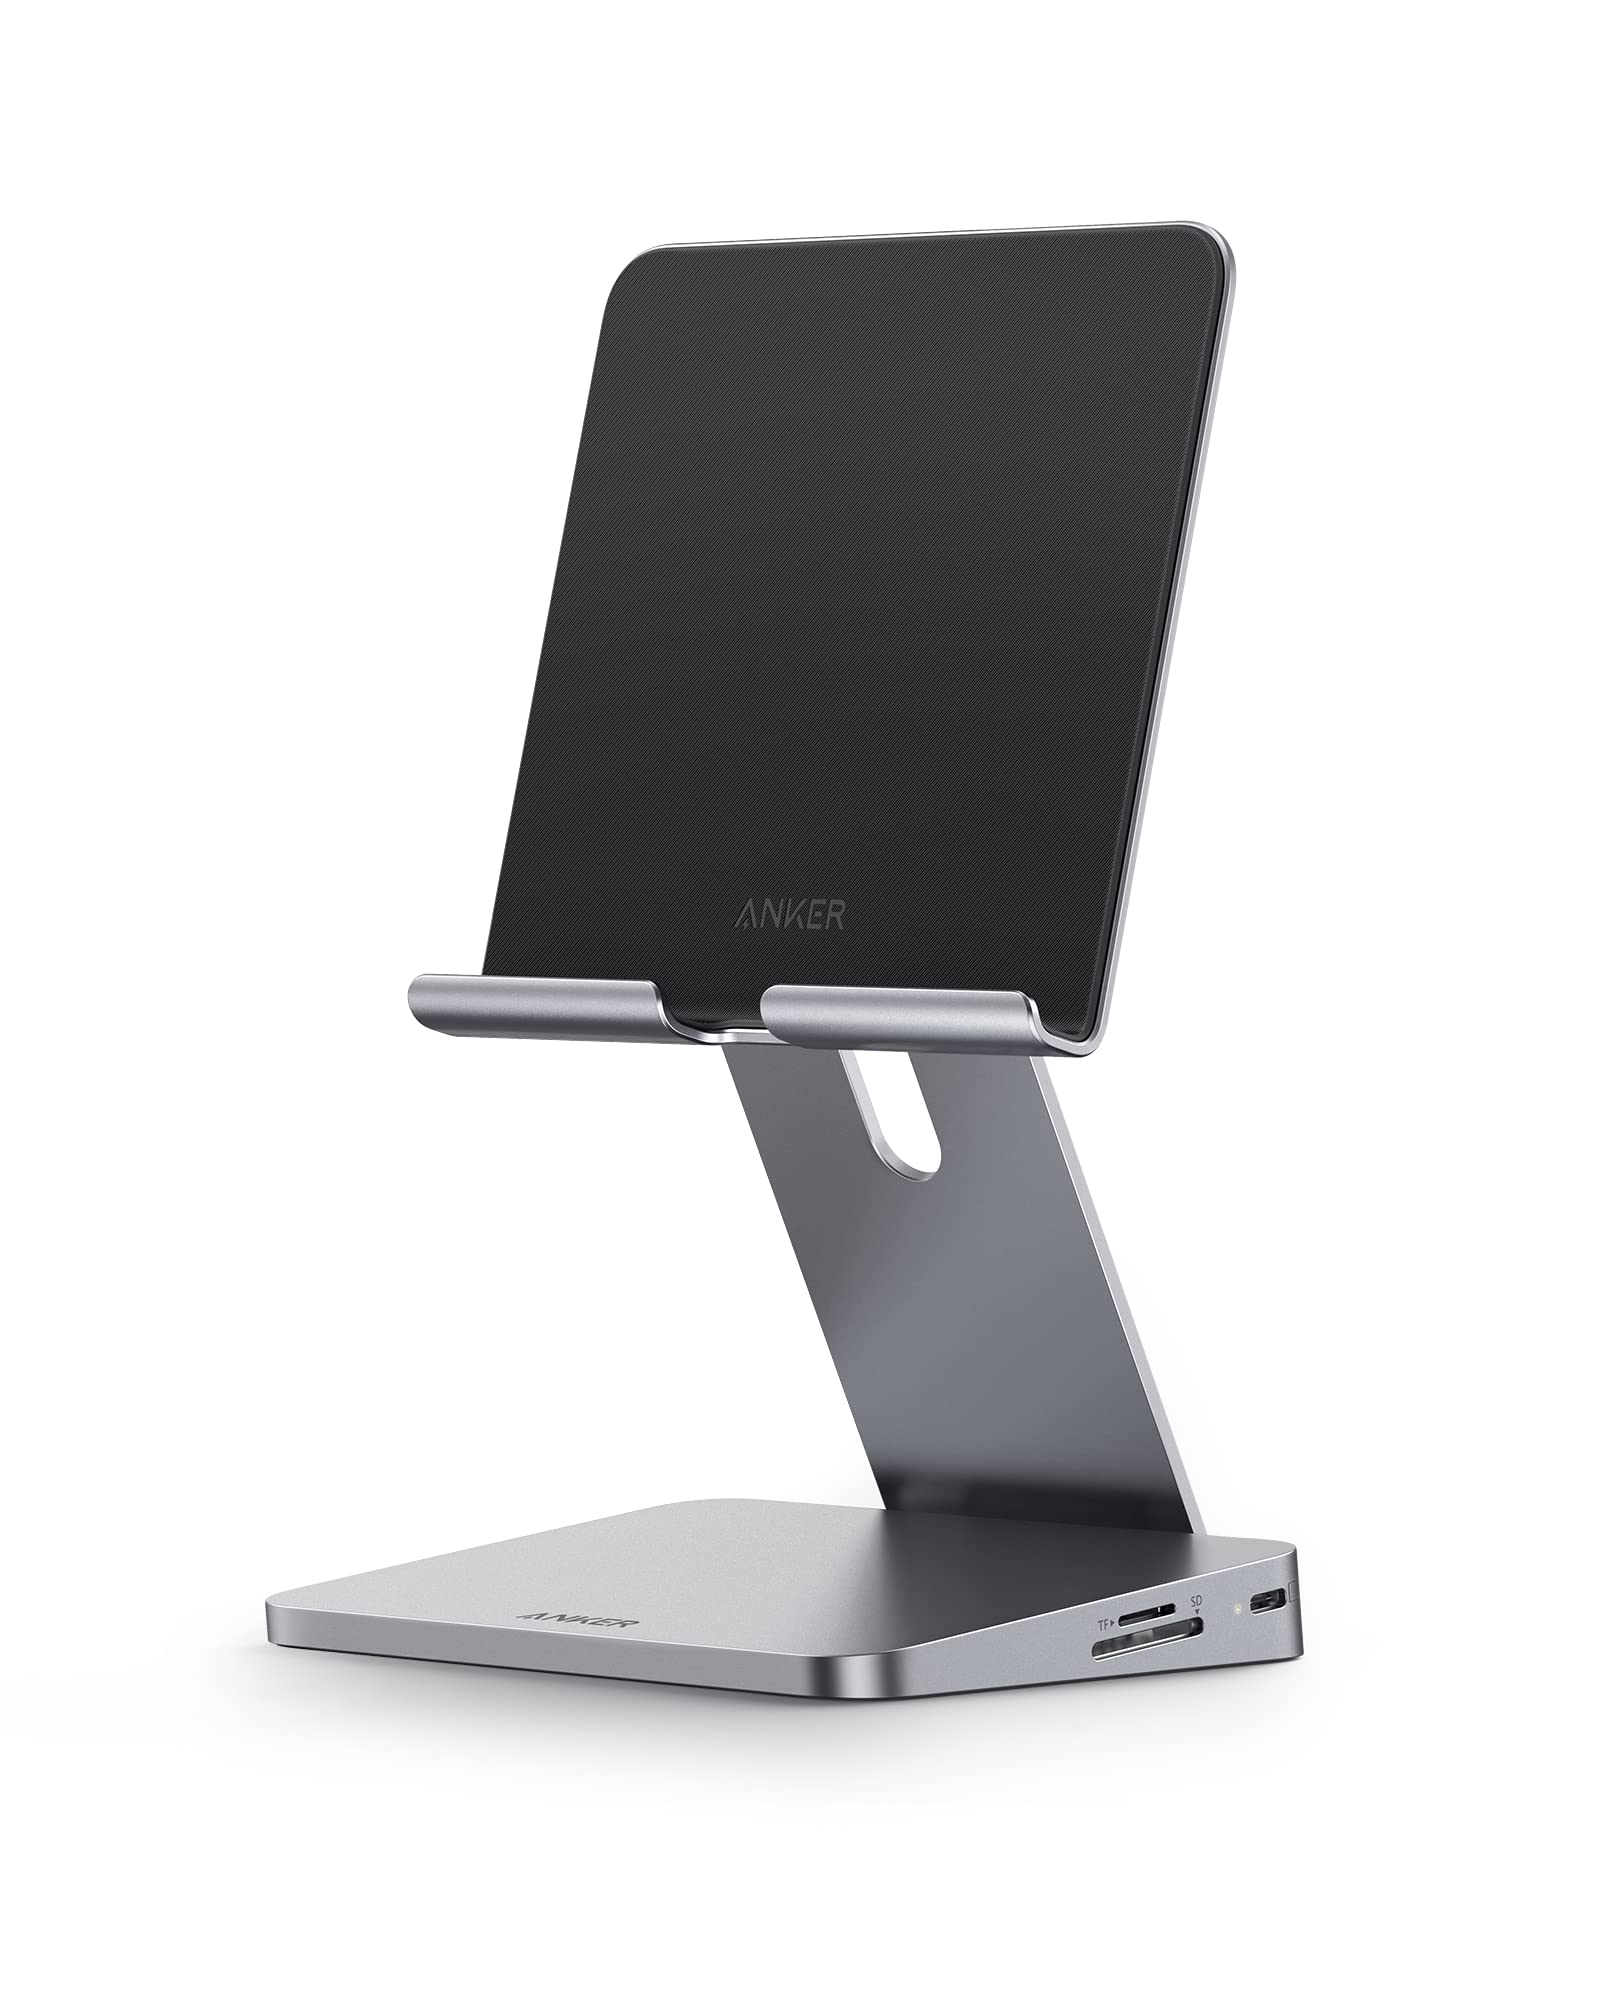 $61.99: Anker 551 USB-C Hub 8-in-1 Tablet Stand for iPad (Various) at AnkerDirect via Amazon